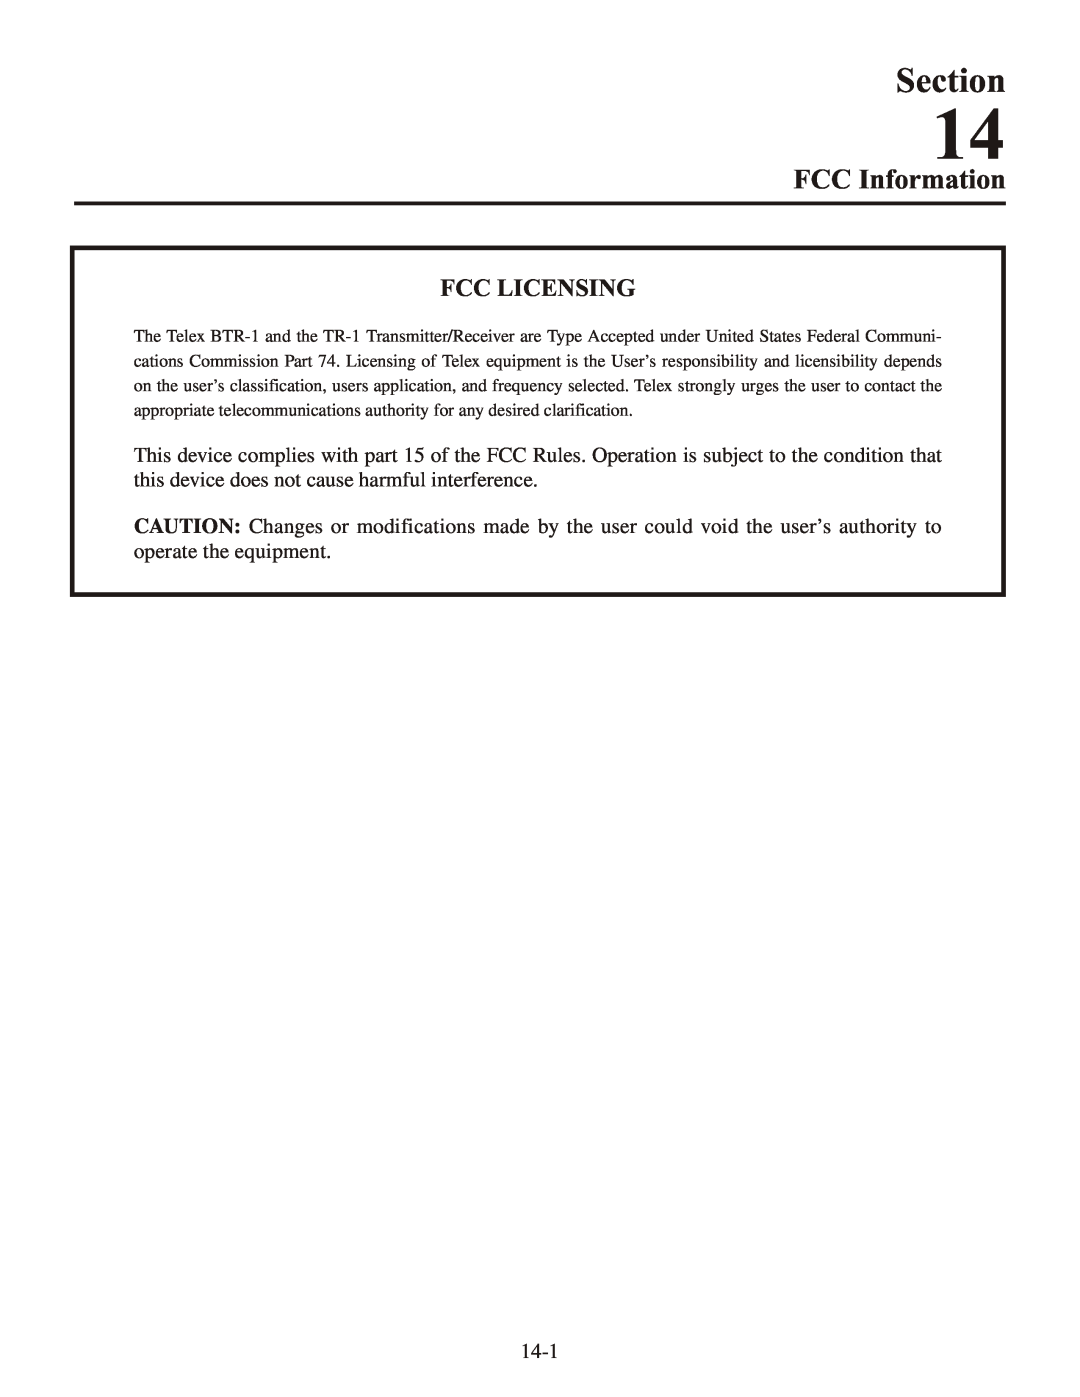 Telex BTR-1 operating instructions FCC Information, Fcc Licensing, Section 